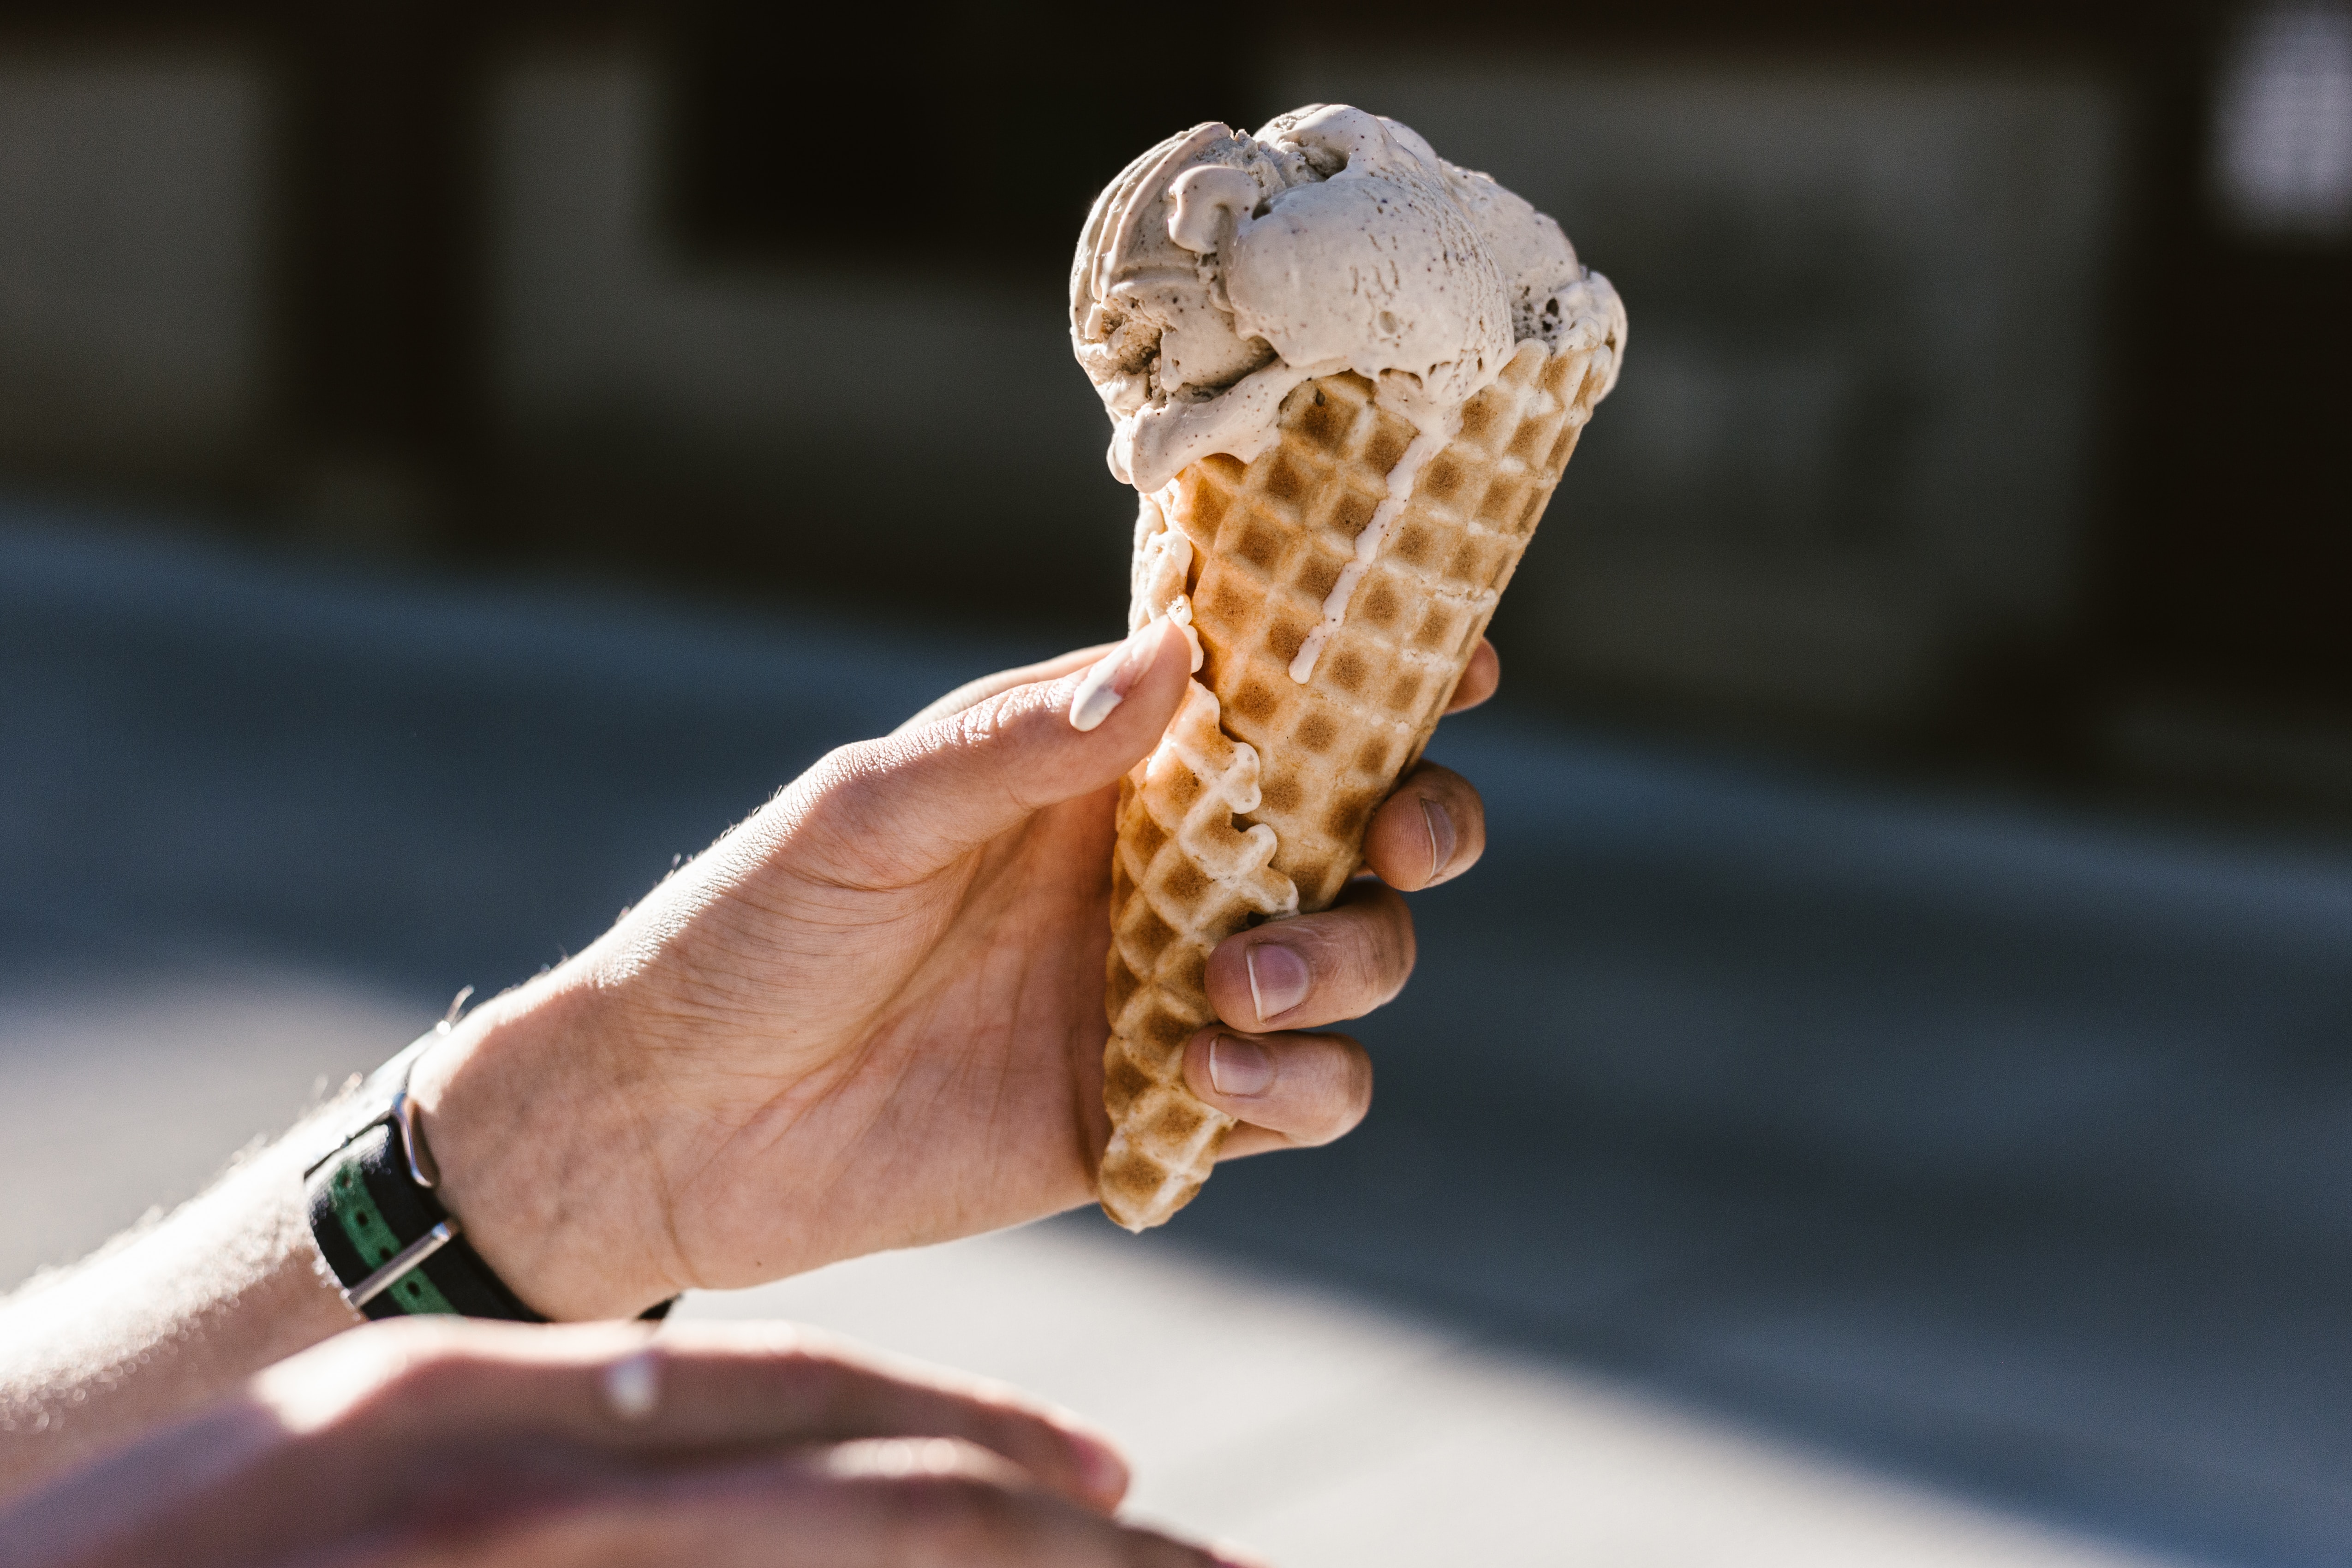 A person holding a melting ice cream cone.